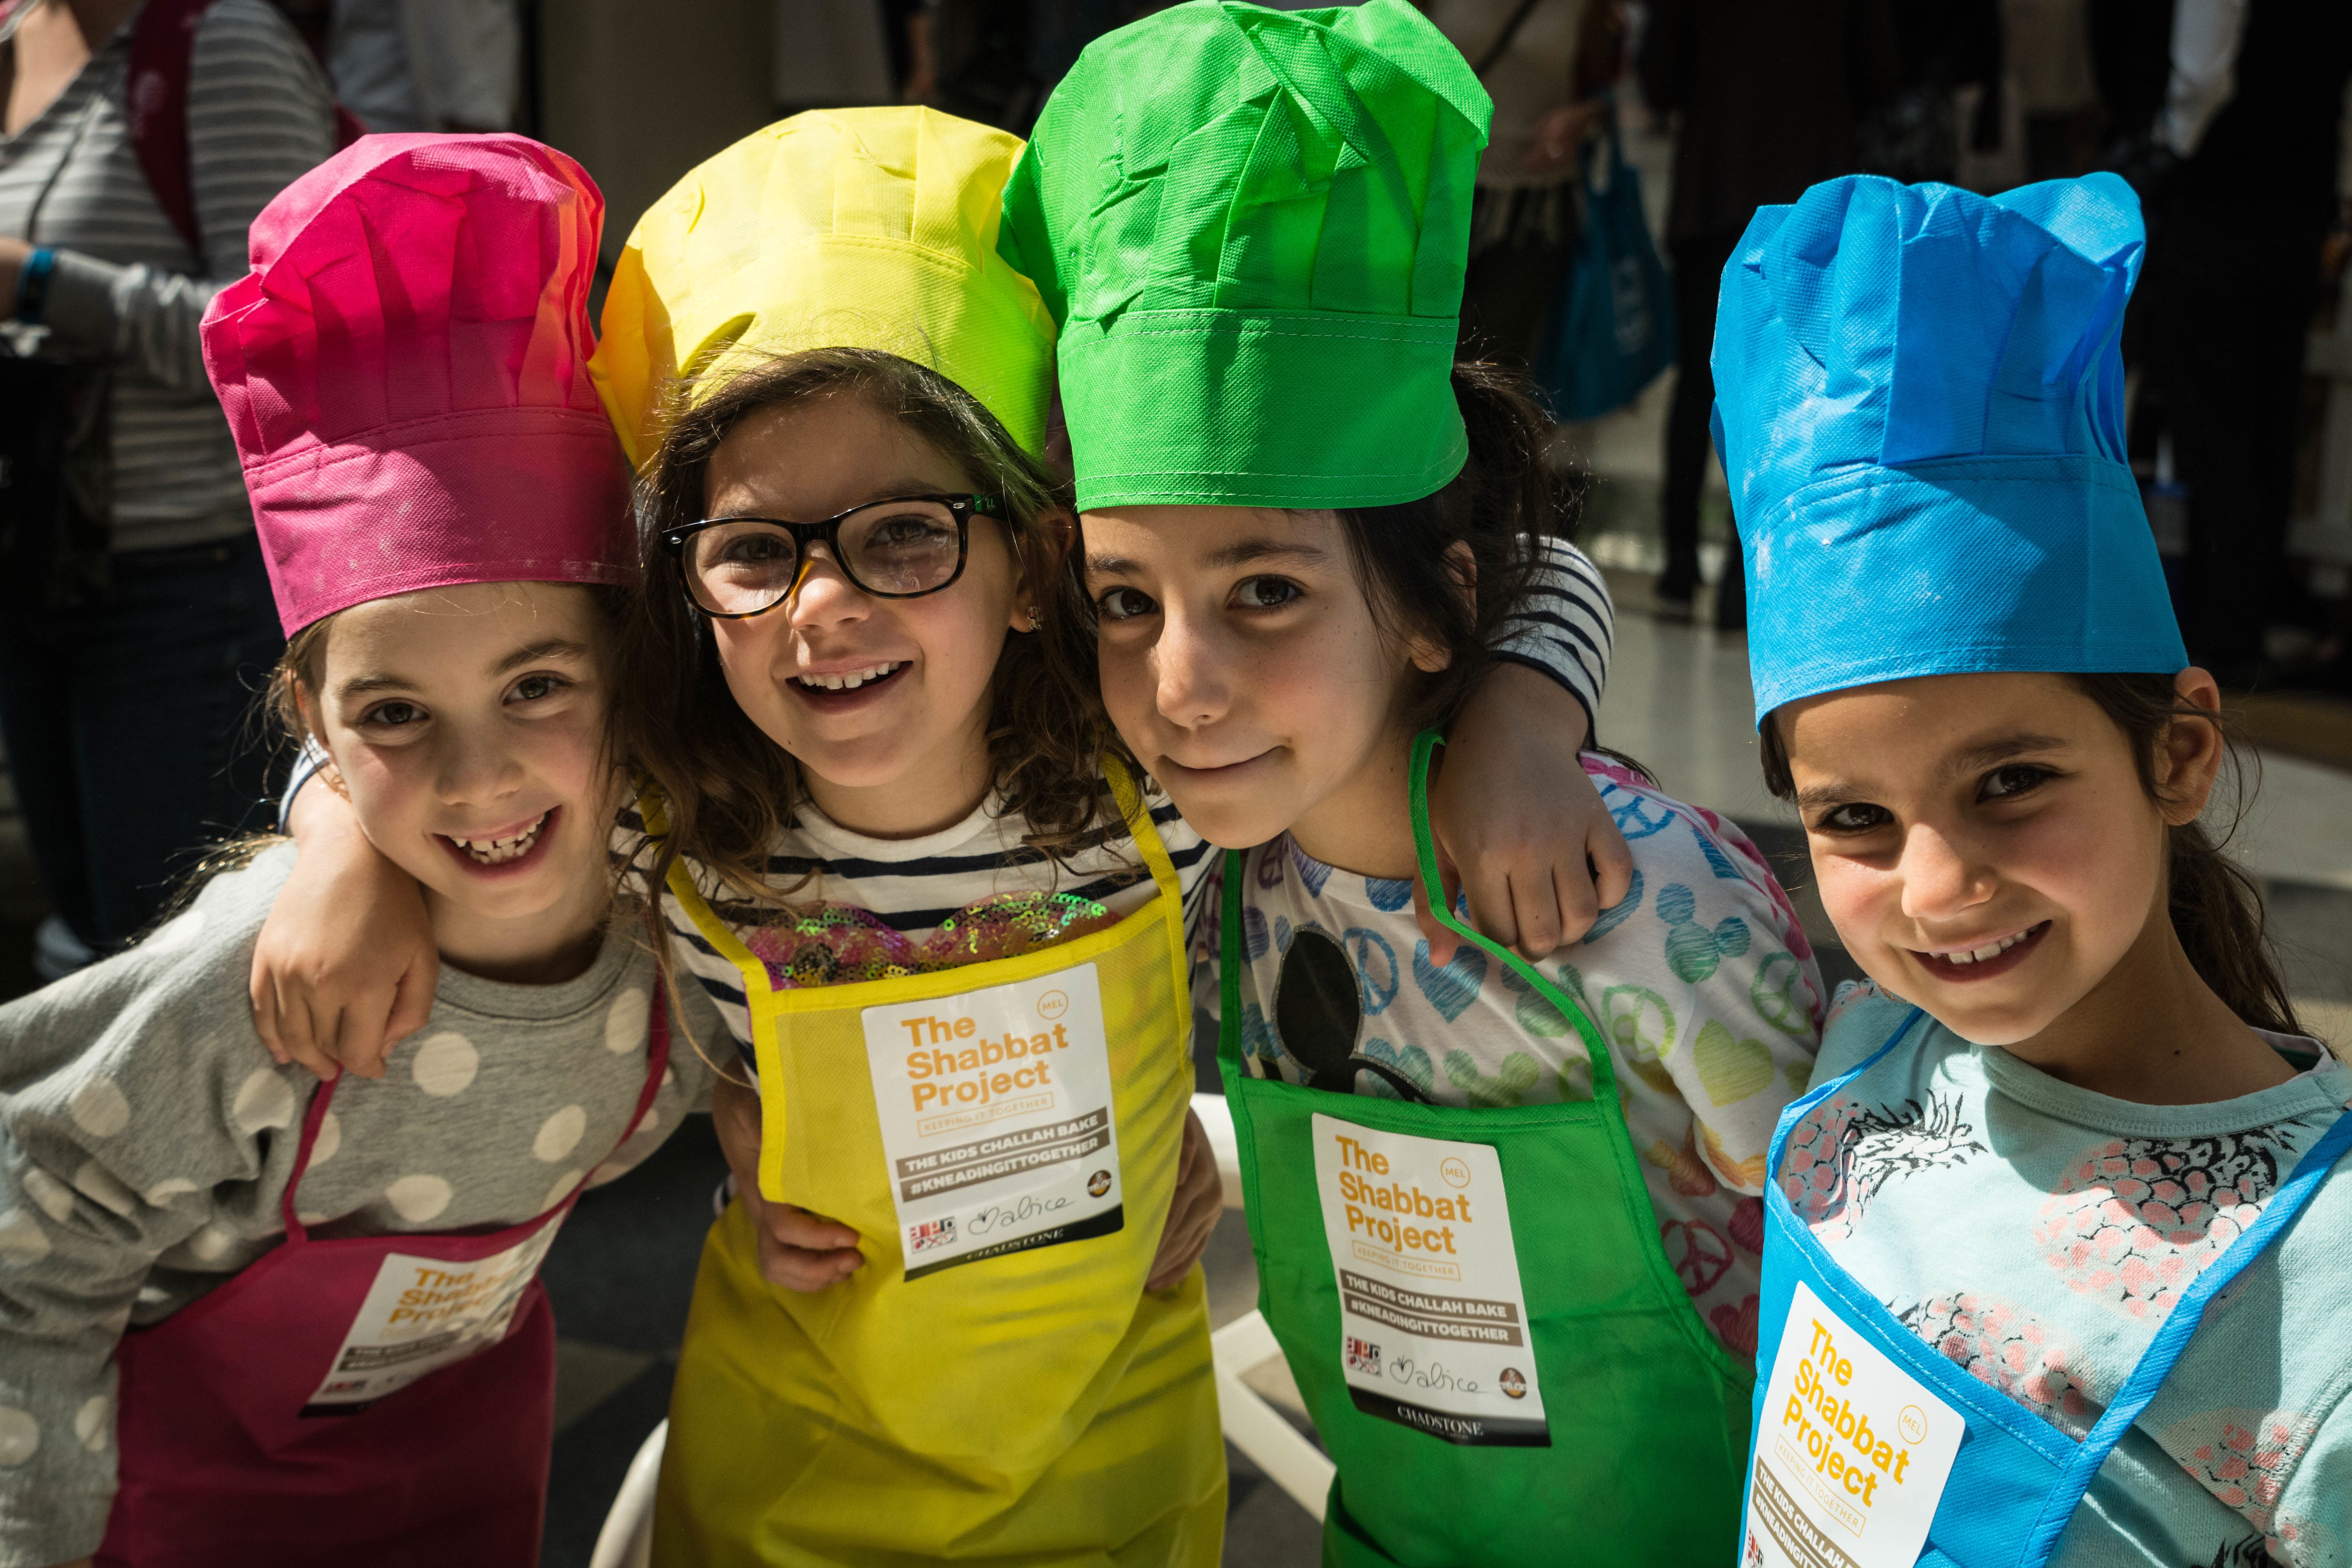 Girls in Melbourne bake challahs during The Shabbat Project (The Shabbat Project)